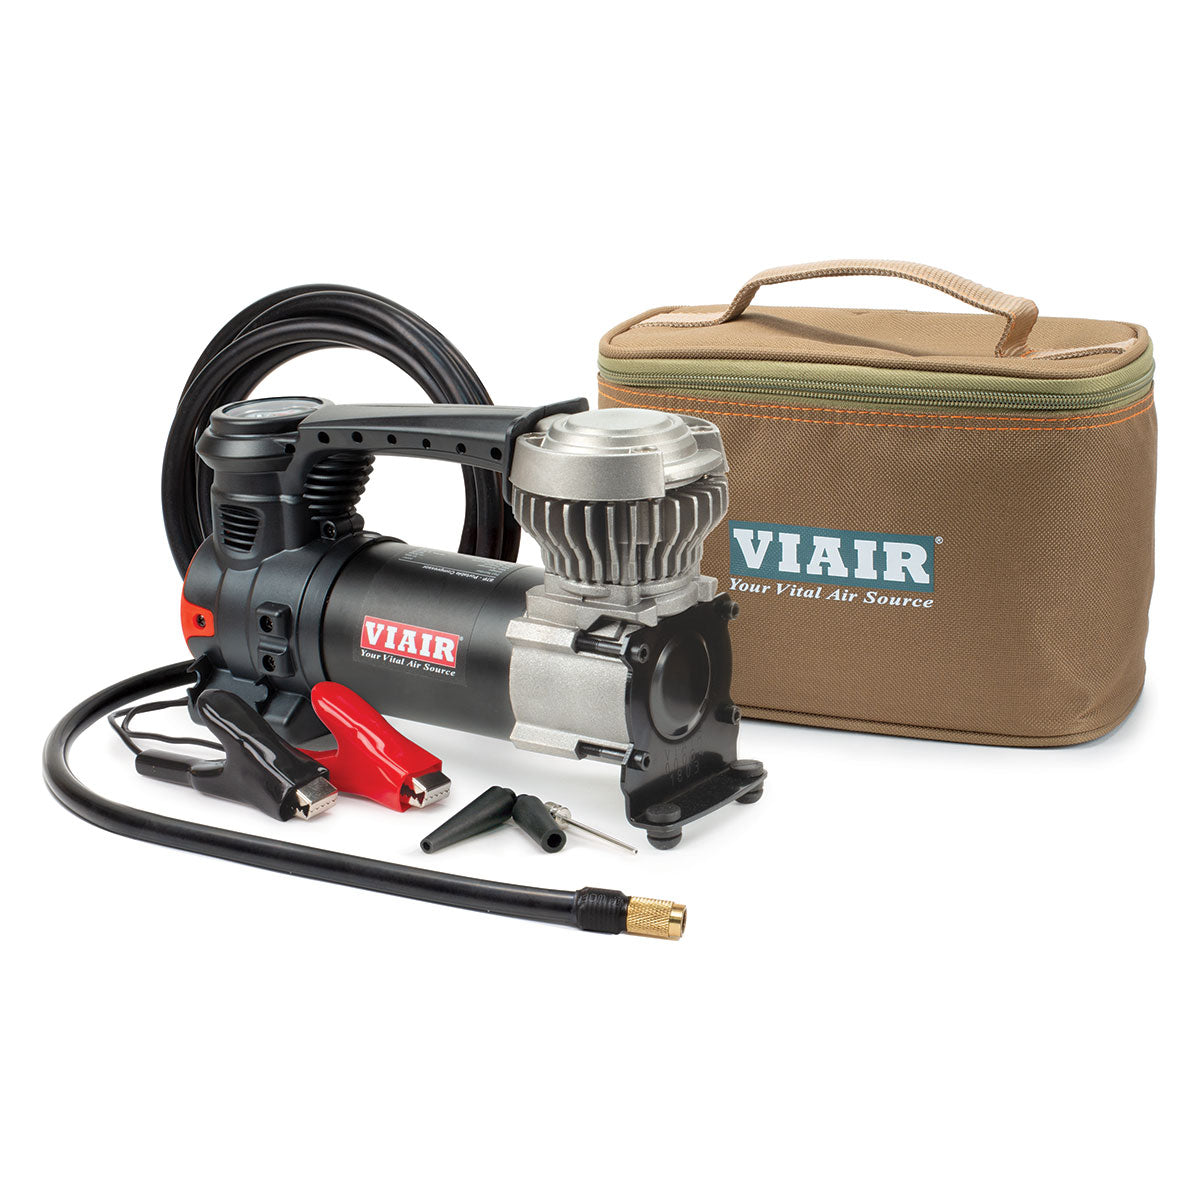 Viair 00087 87P Compressor Kit with Twist-on Tire Chuck - Up to 31" Tires